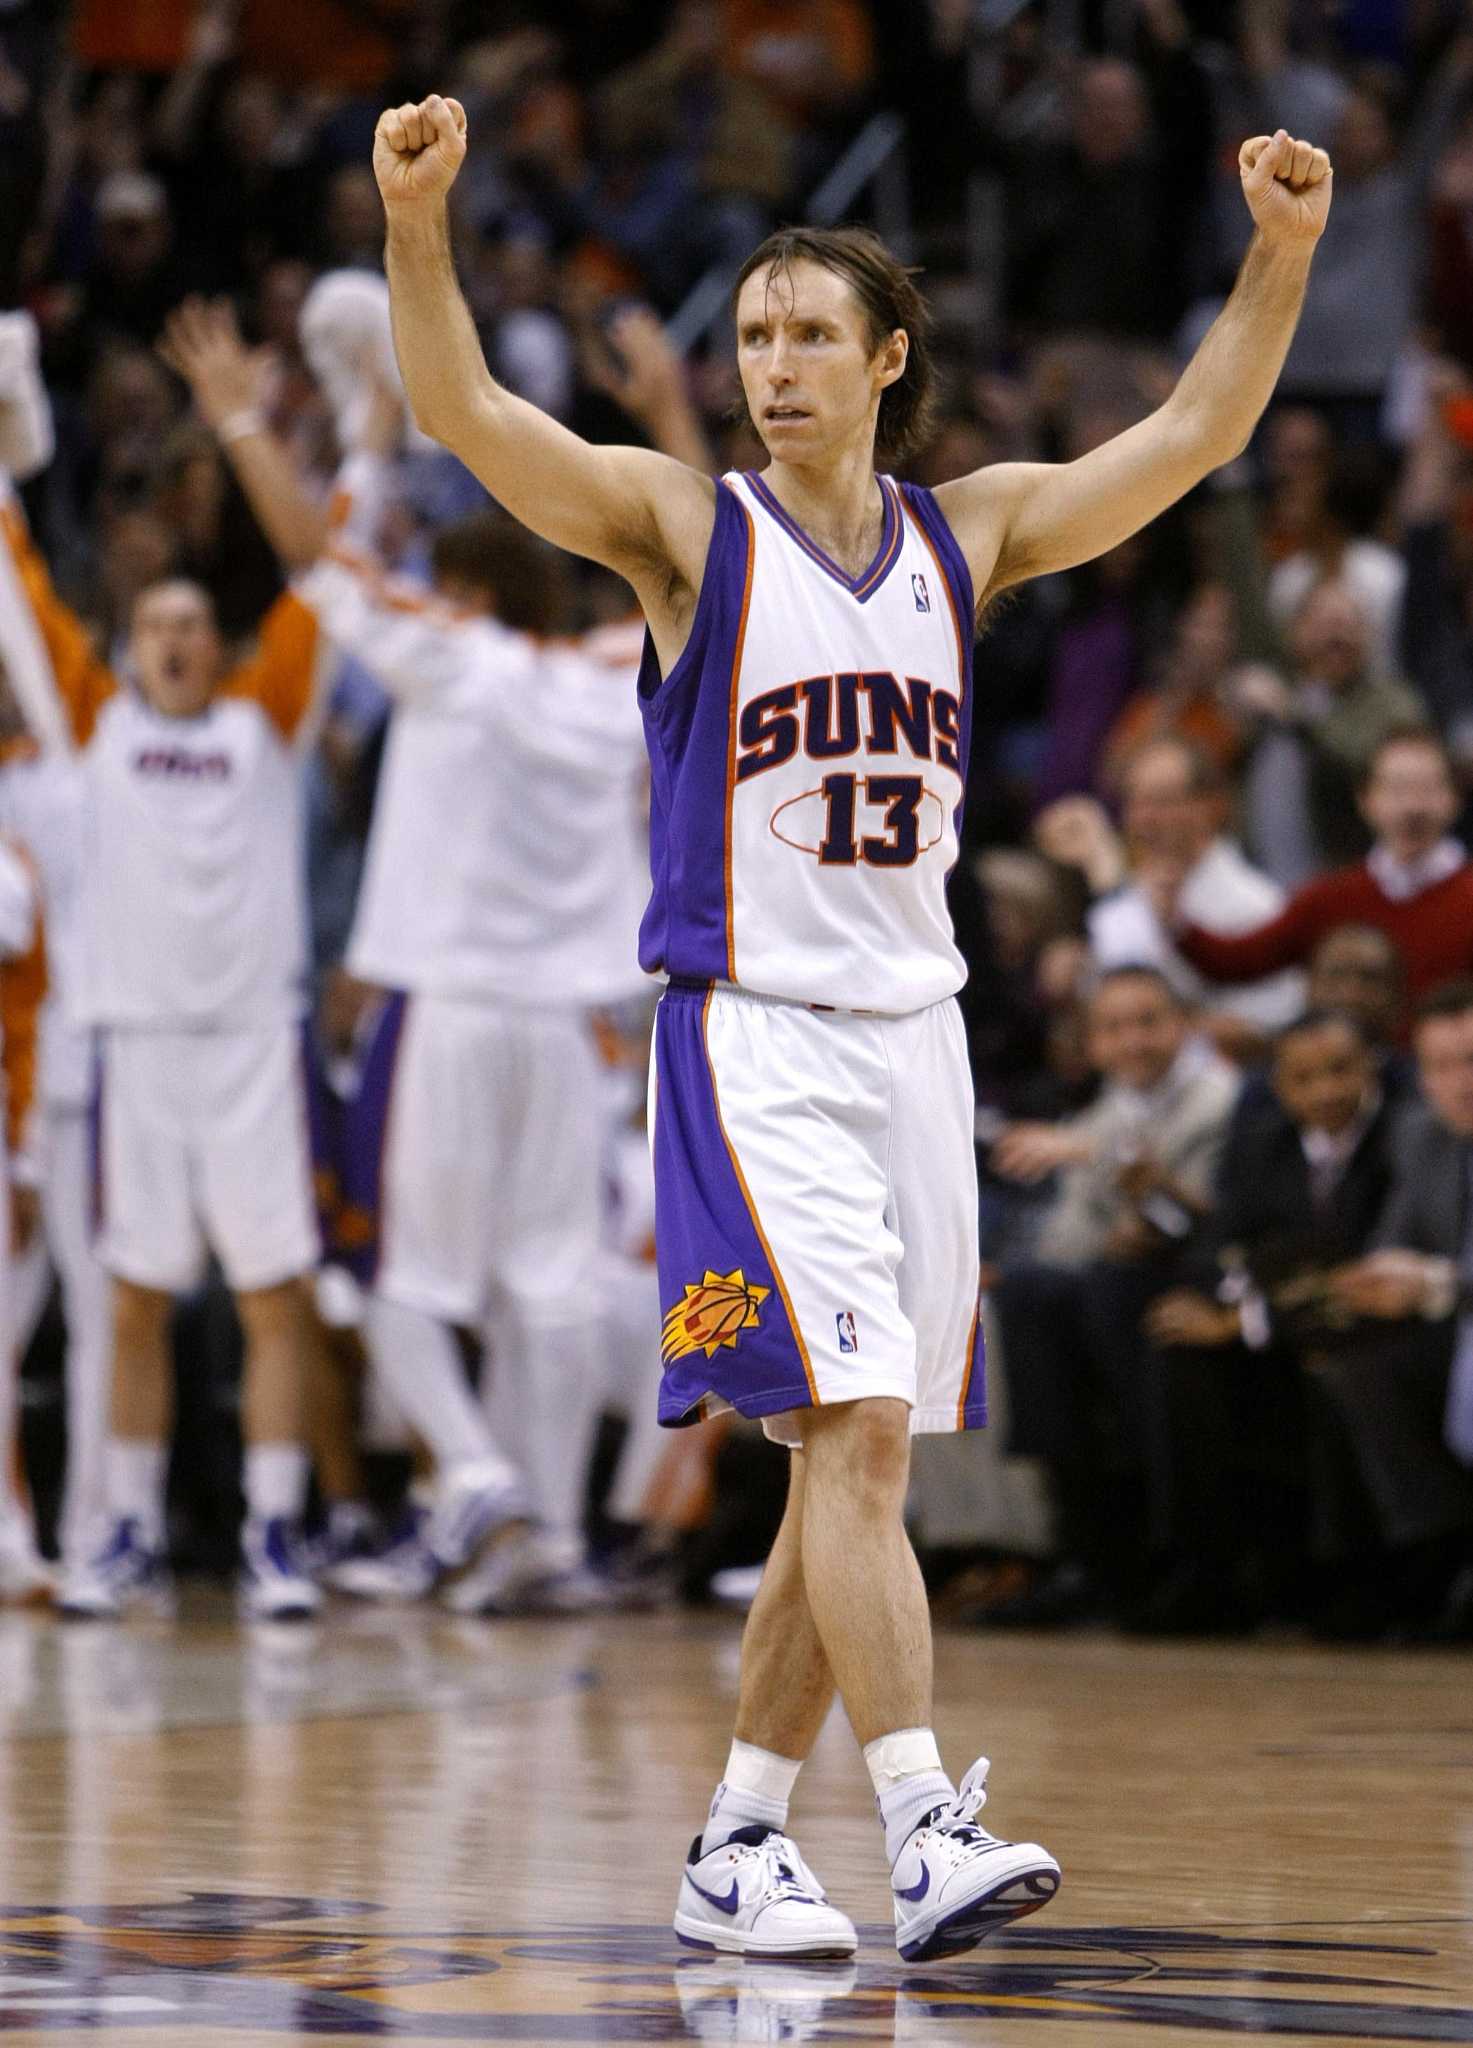 Canadian Hall of Famer Steve Nash eager to get started on new career as  Nets coach